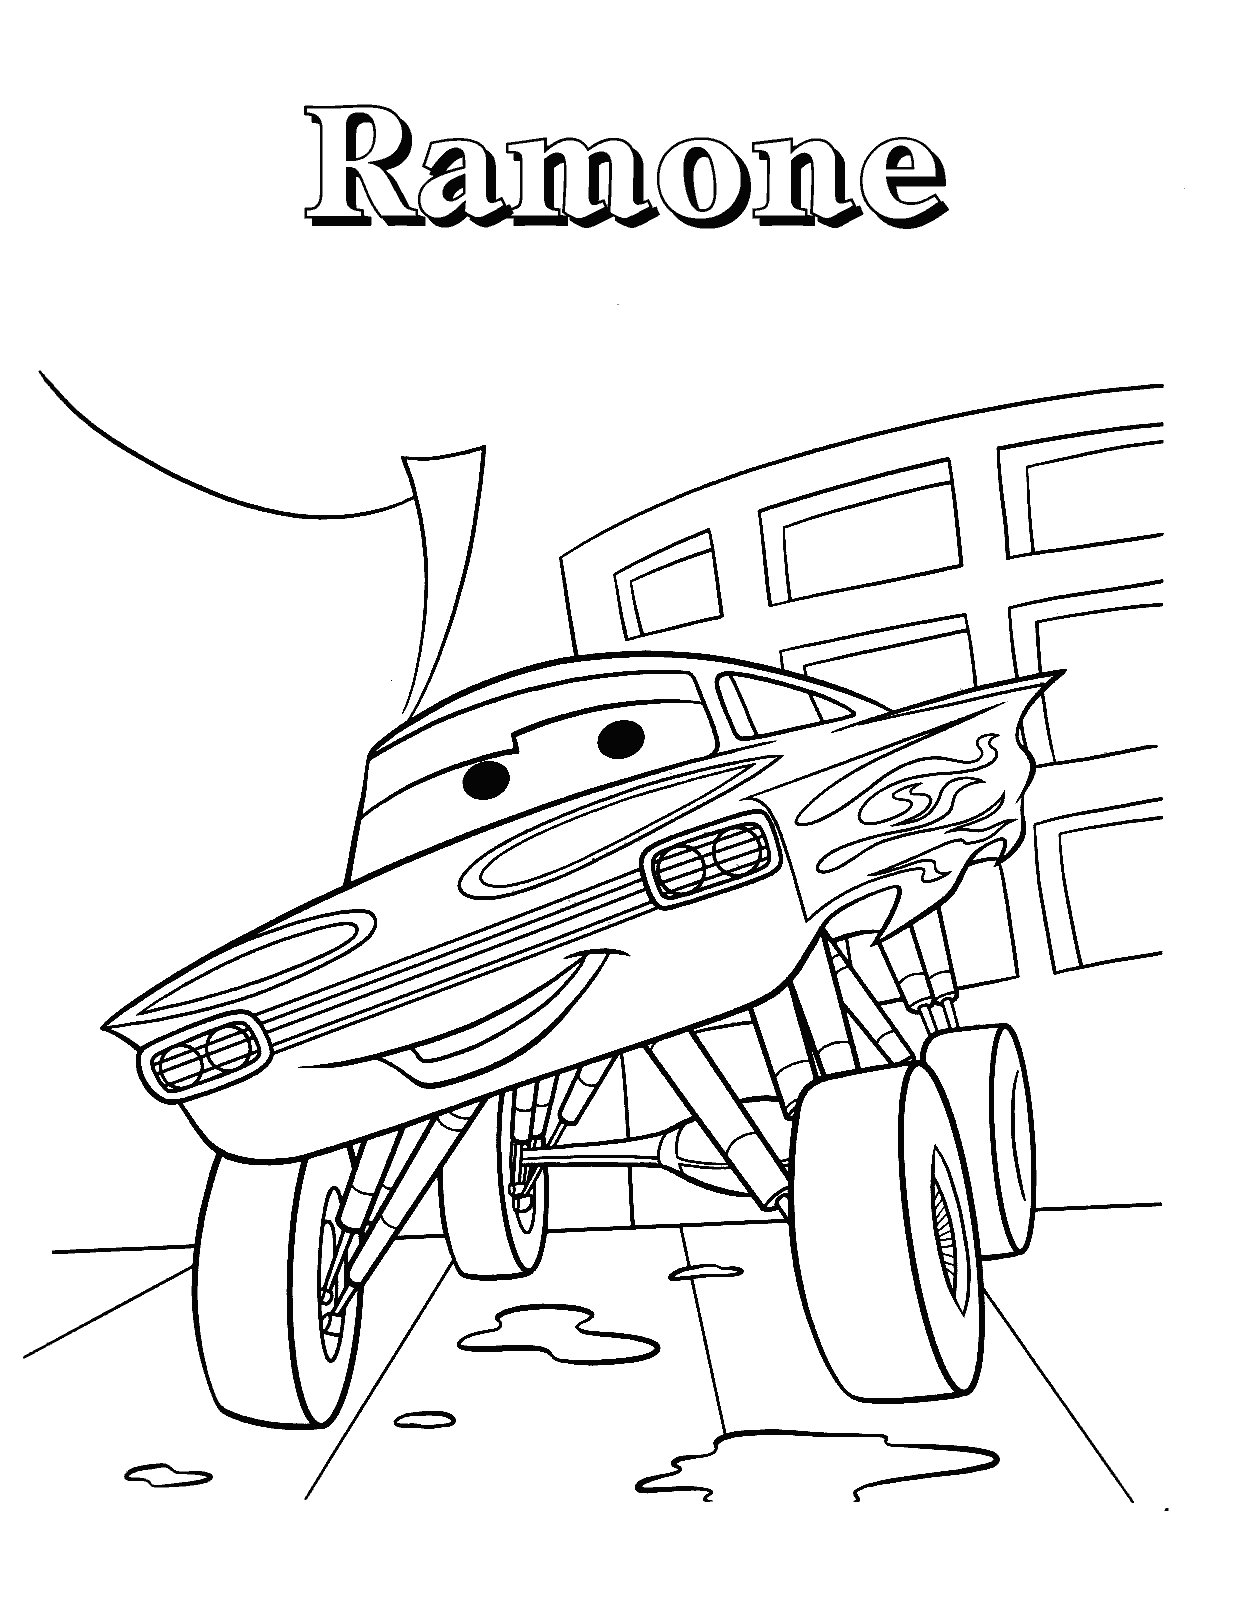 Monsone 41 The Disney Cars Coloring Pages Background Perspective